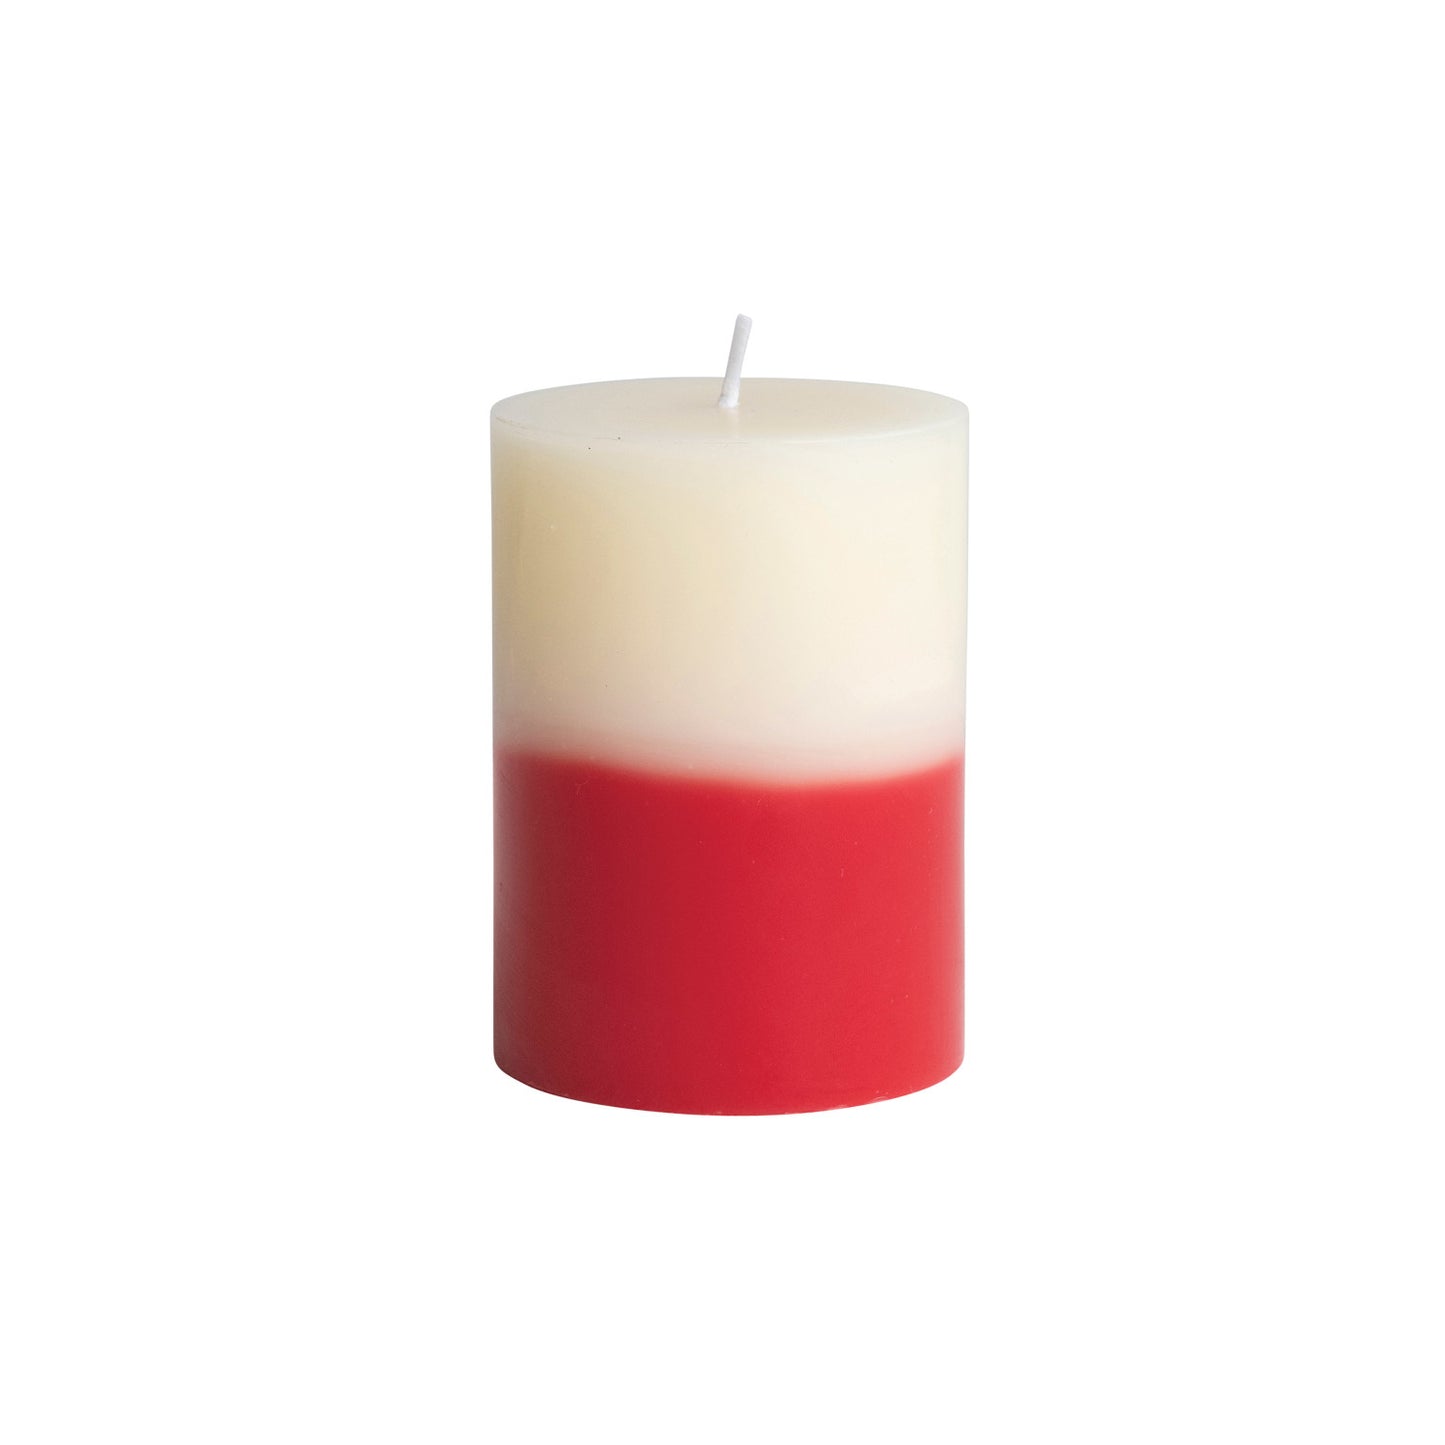 Cream & Red Unscented Two-Tone Pillar Candle - Small